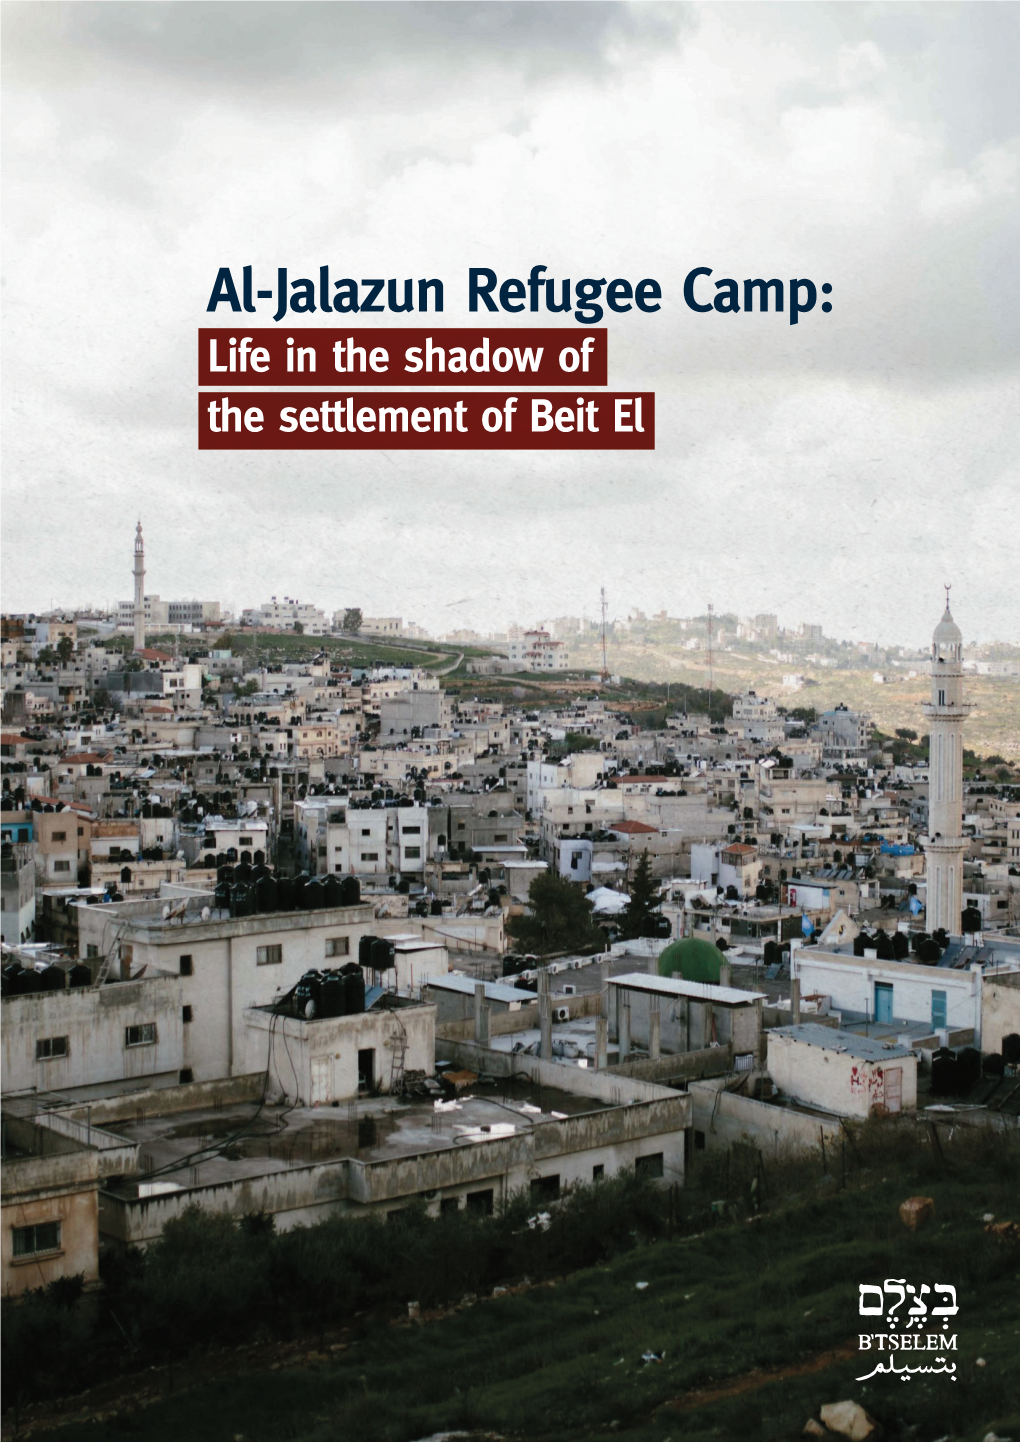 Al-Jalazun R.C., Life in the Shadow of the Settlement of Beit